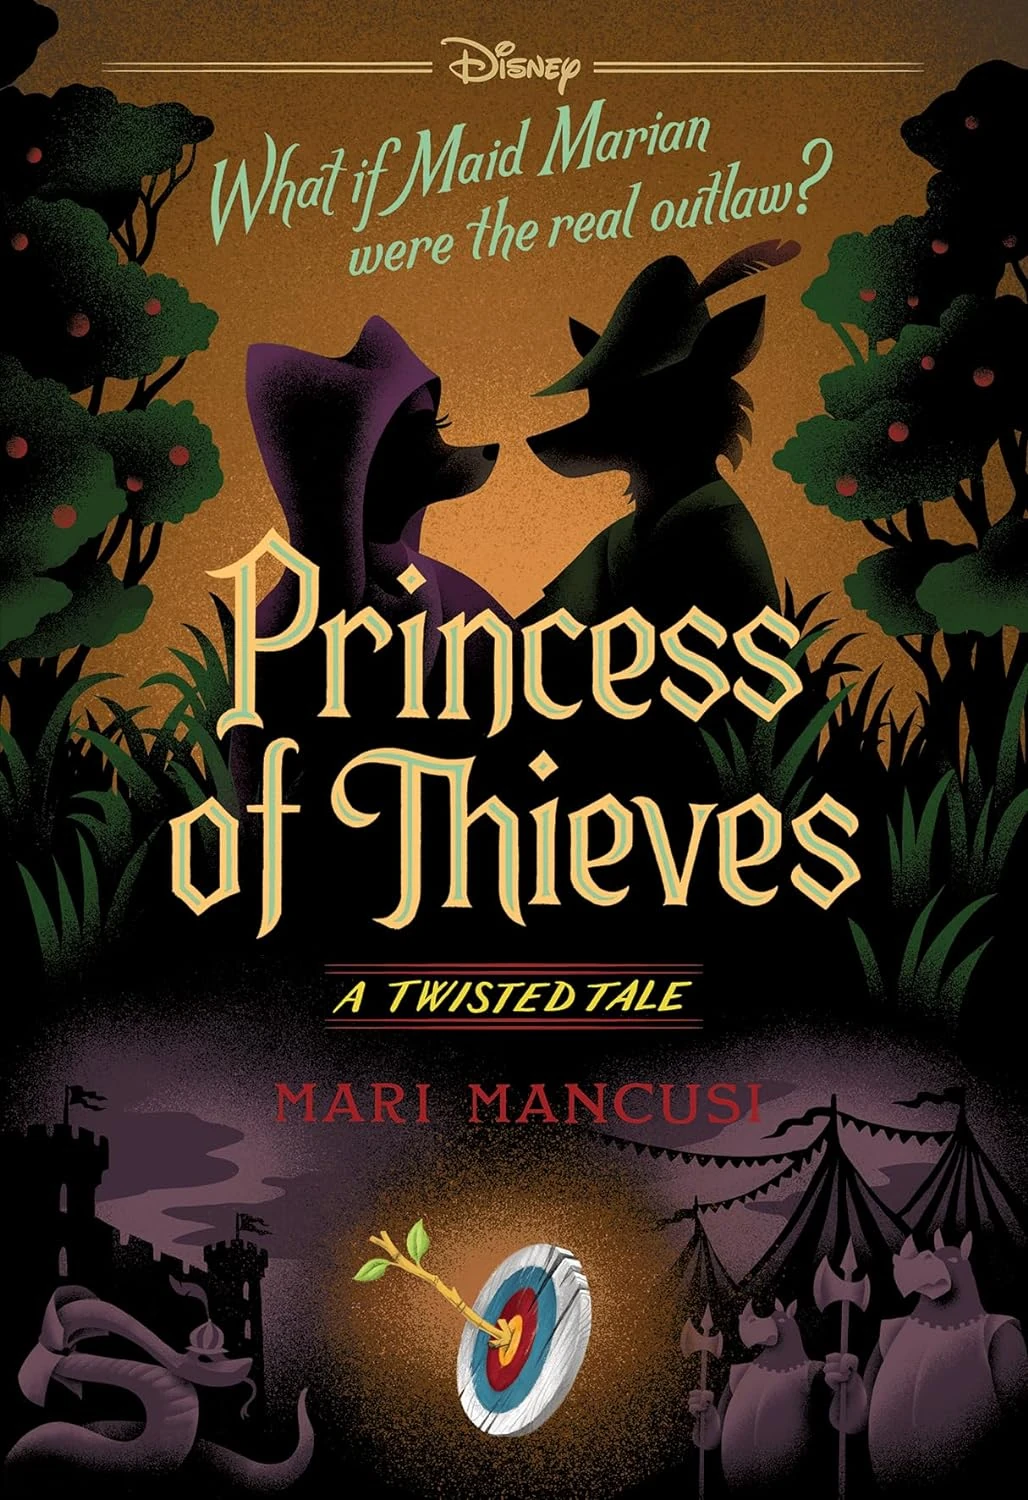 Princess of Thieves (A Twisted Tale), Disney Wiki